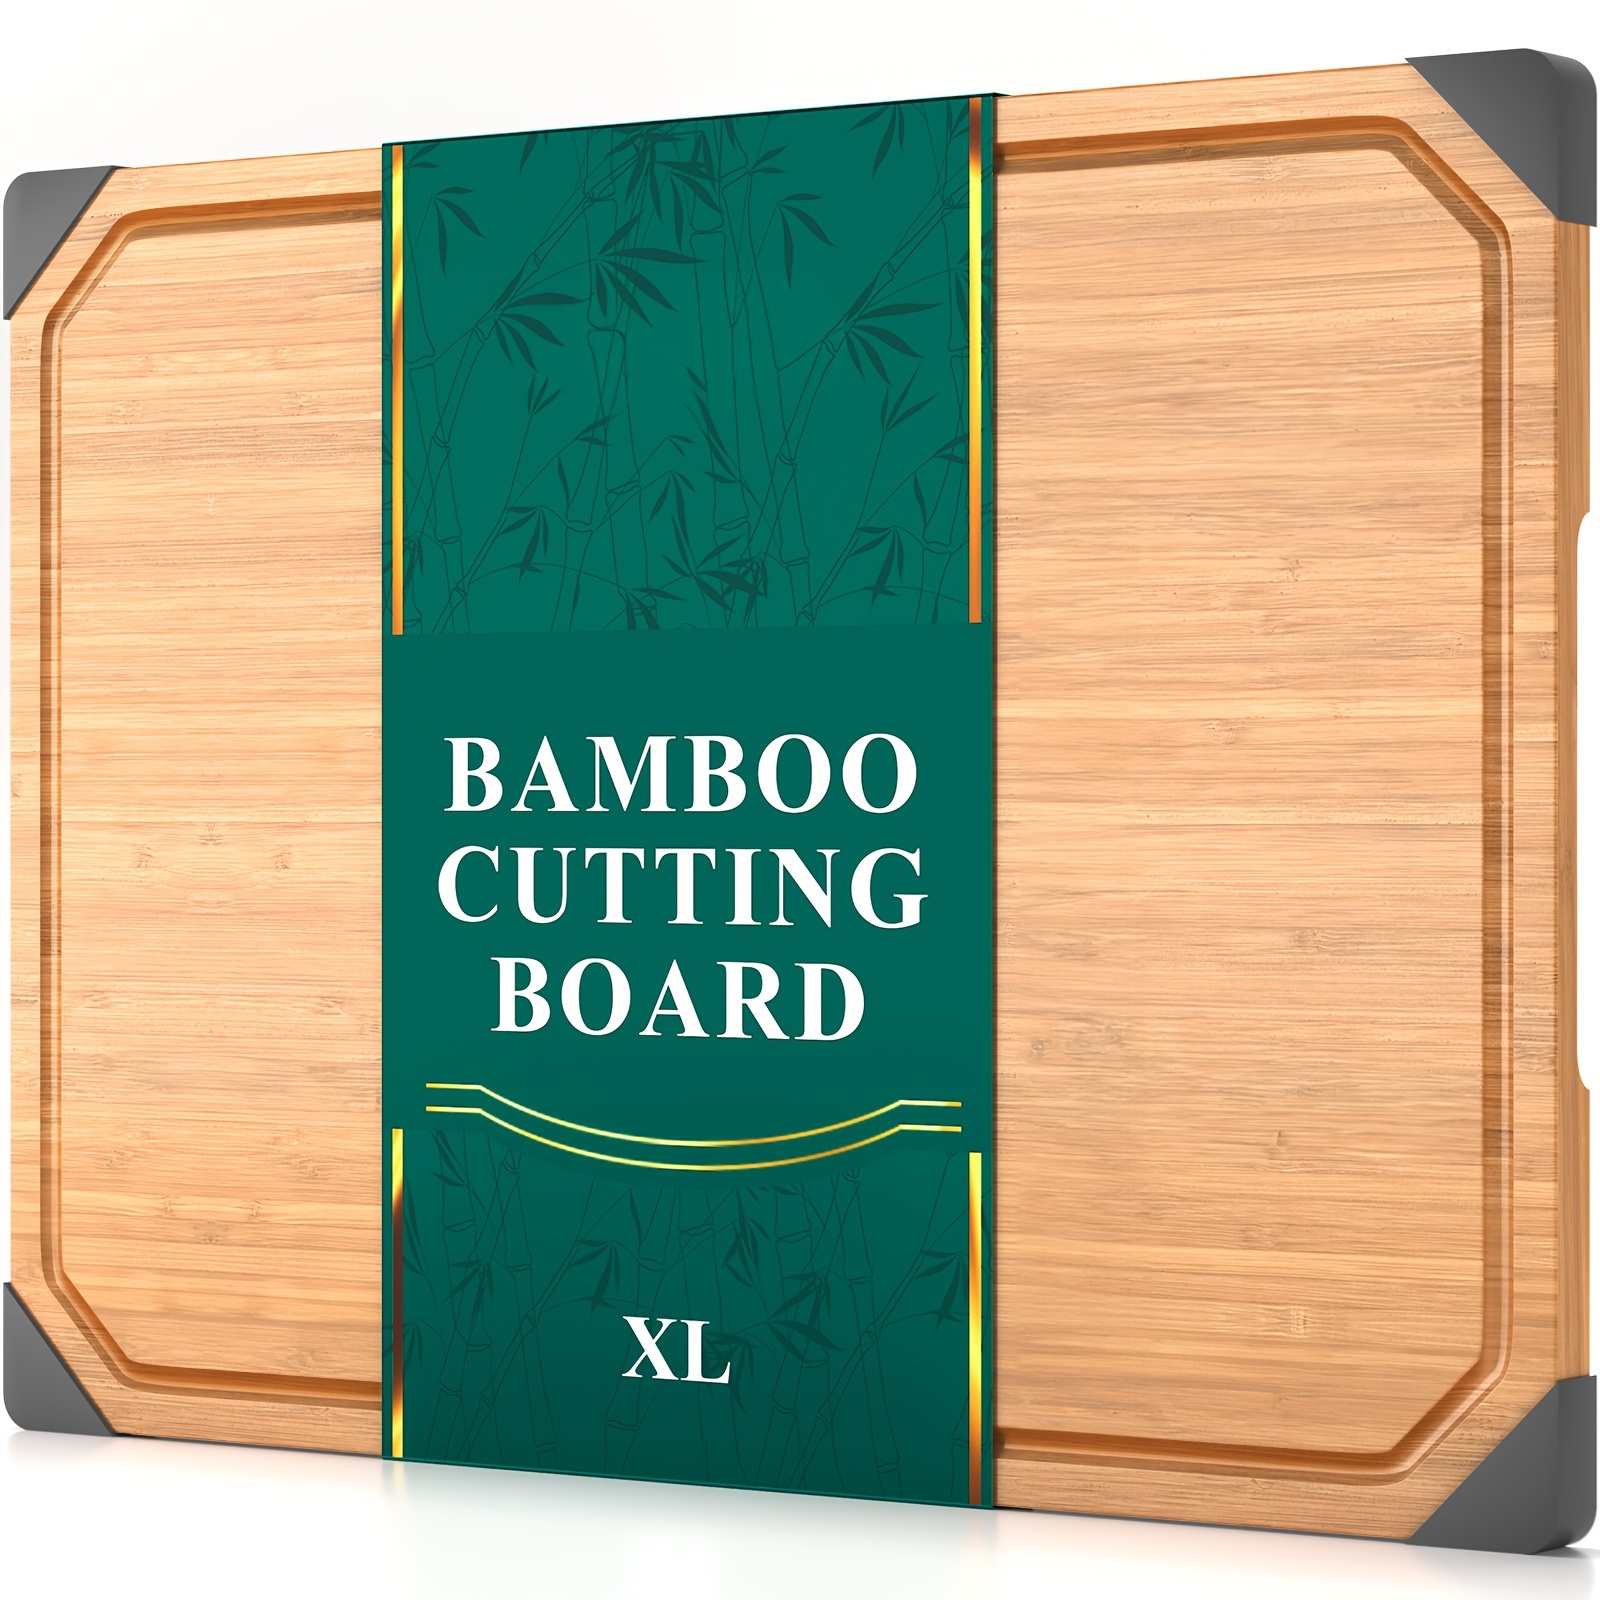 

Bamboo Cutting Board, Empune Wood Cutting Boards For Kitchen With Non-slip Rubber Feet Wooden Chopping Board For Meat And Vegetables, Xl